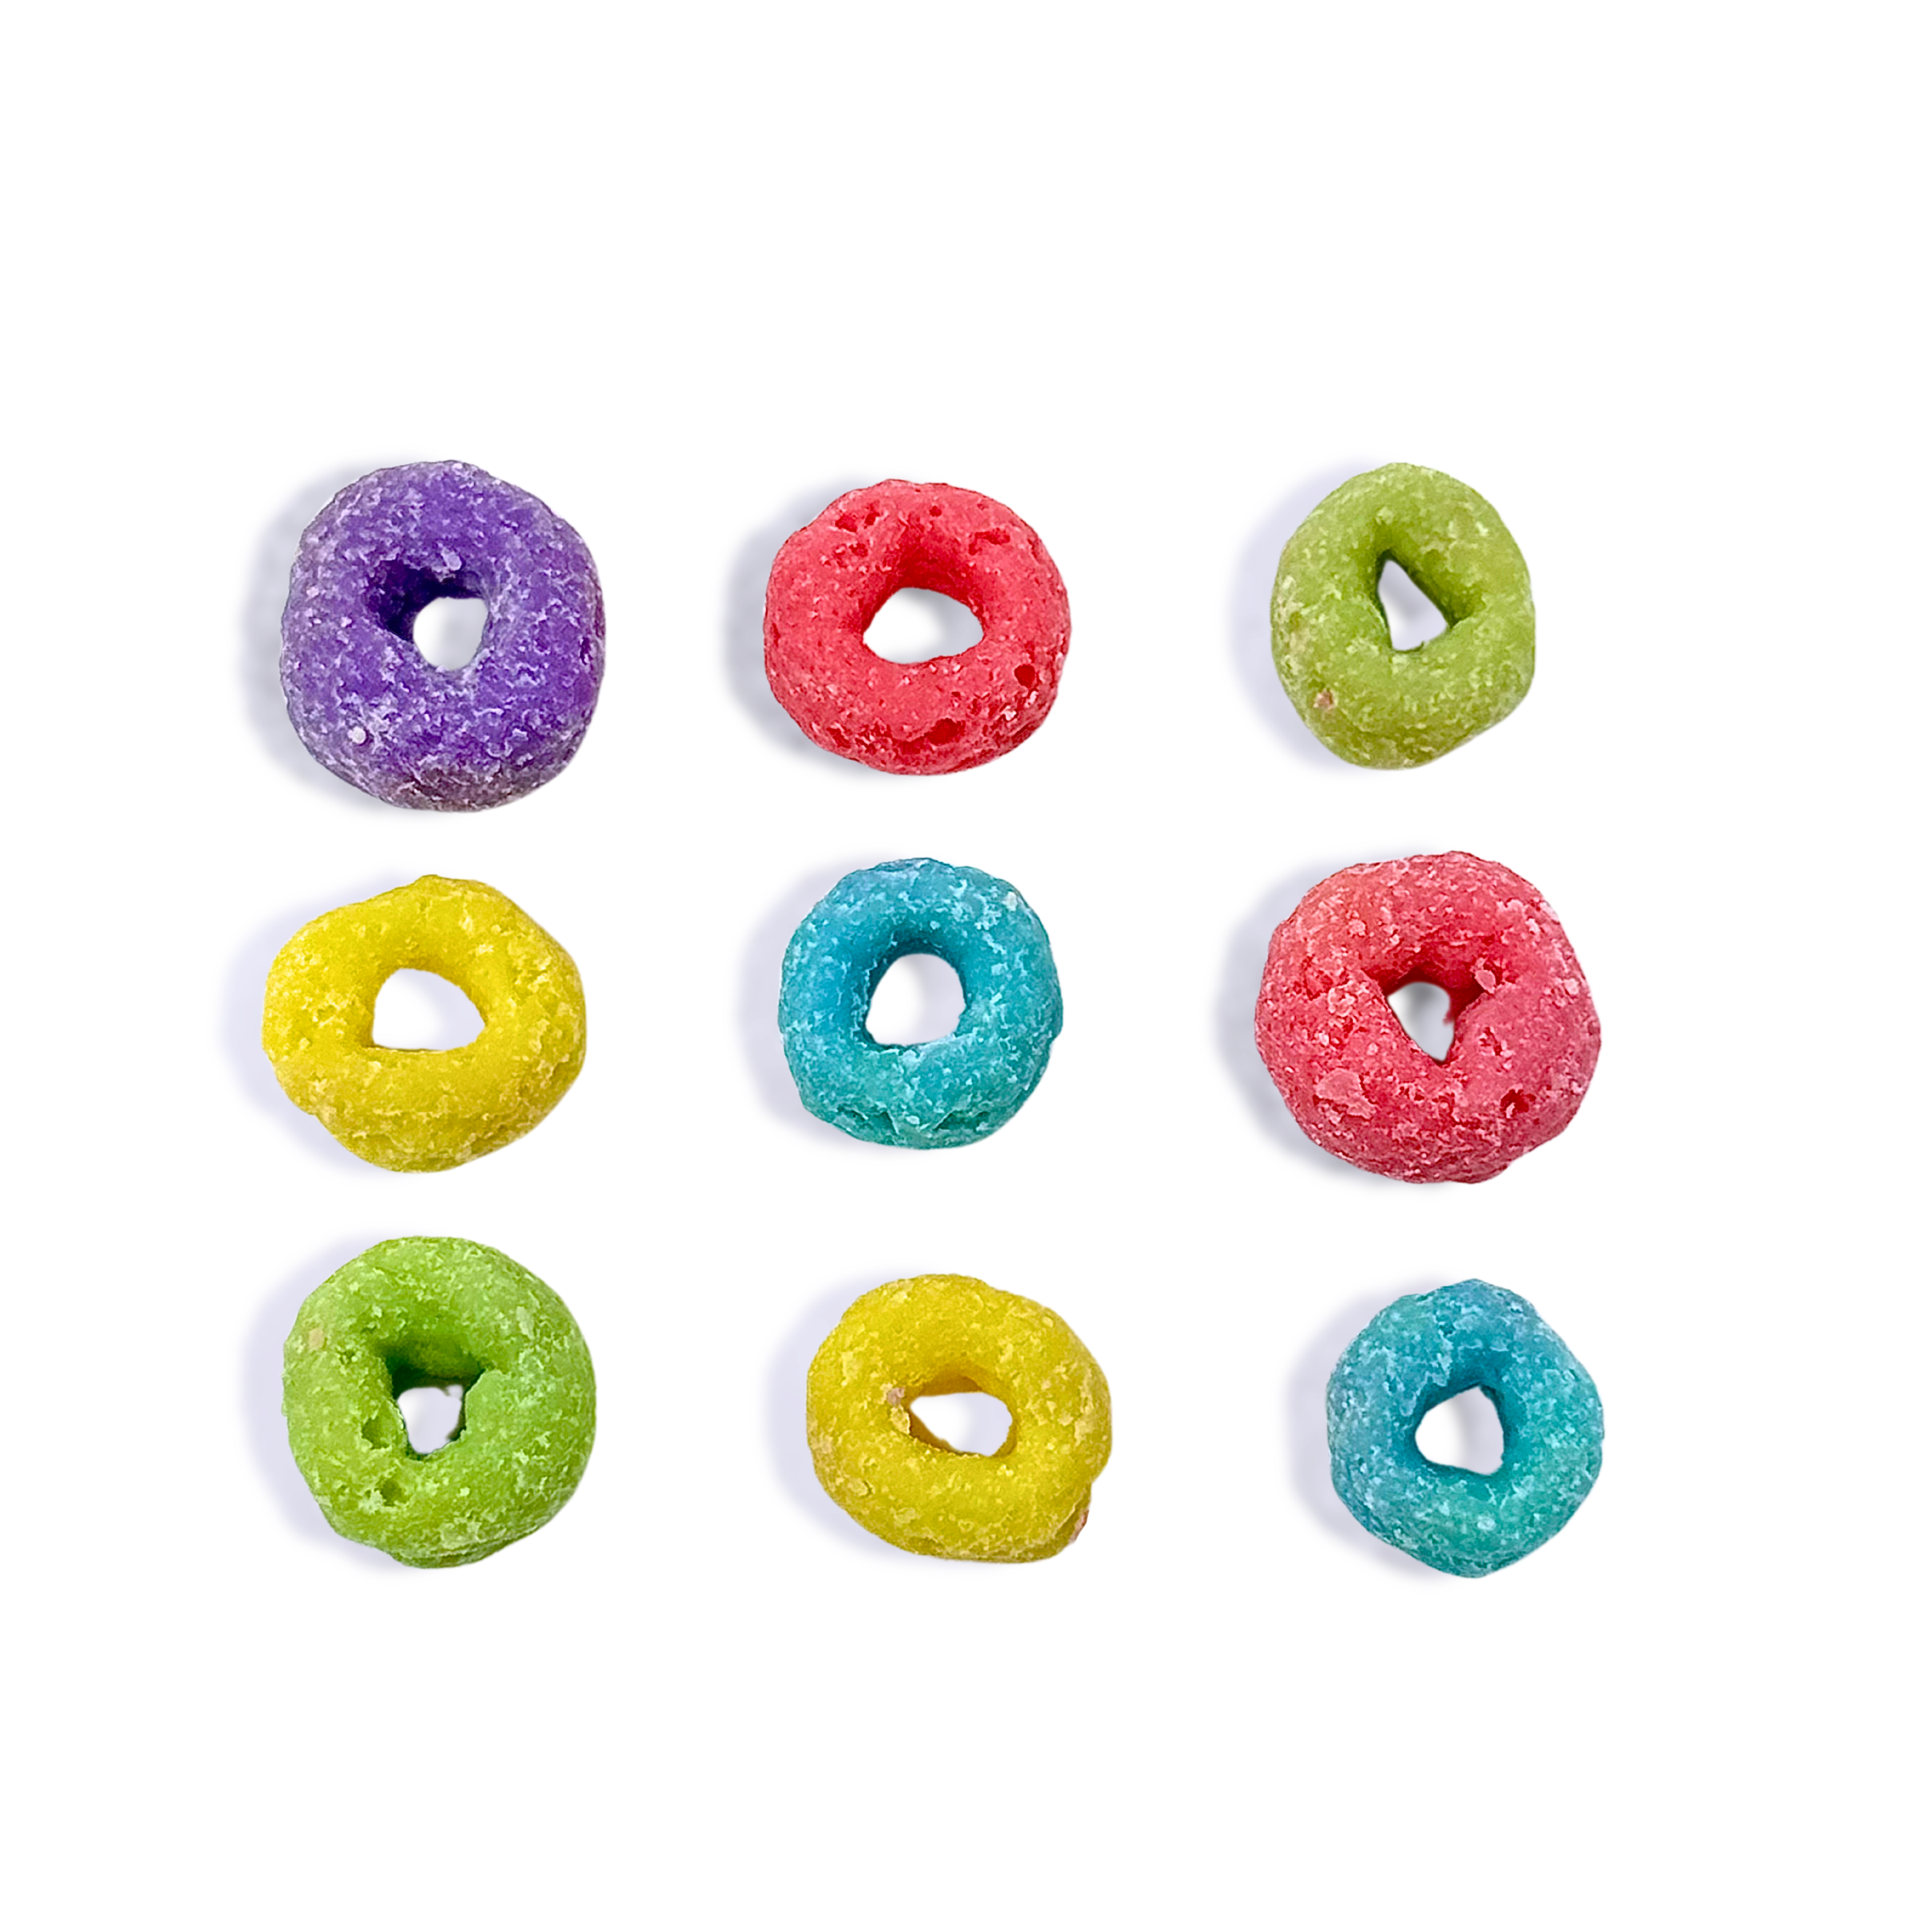 Fruit Loops Cereal Wax Melts